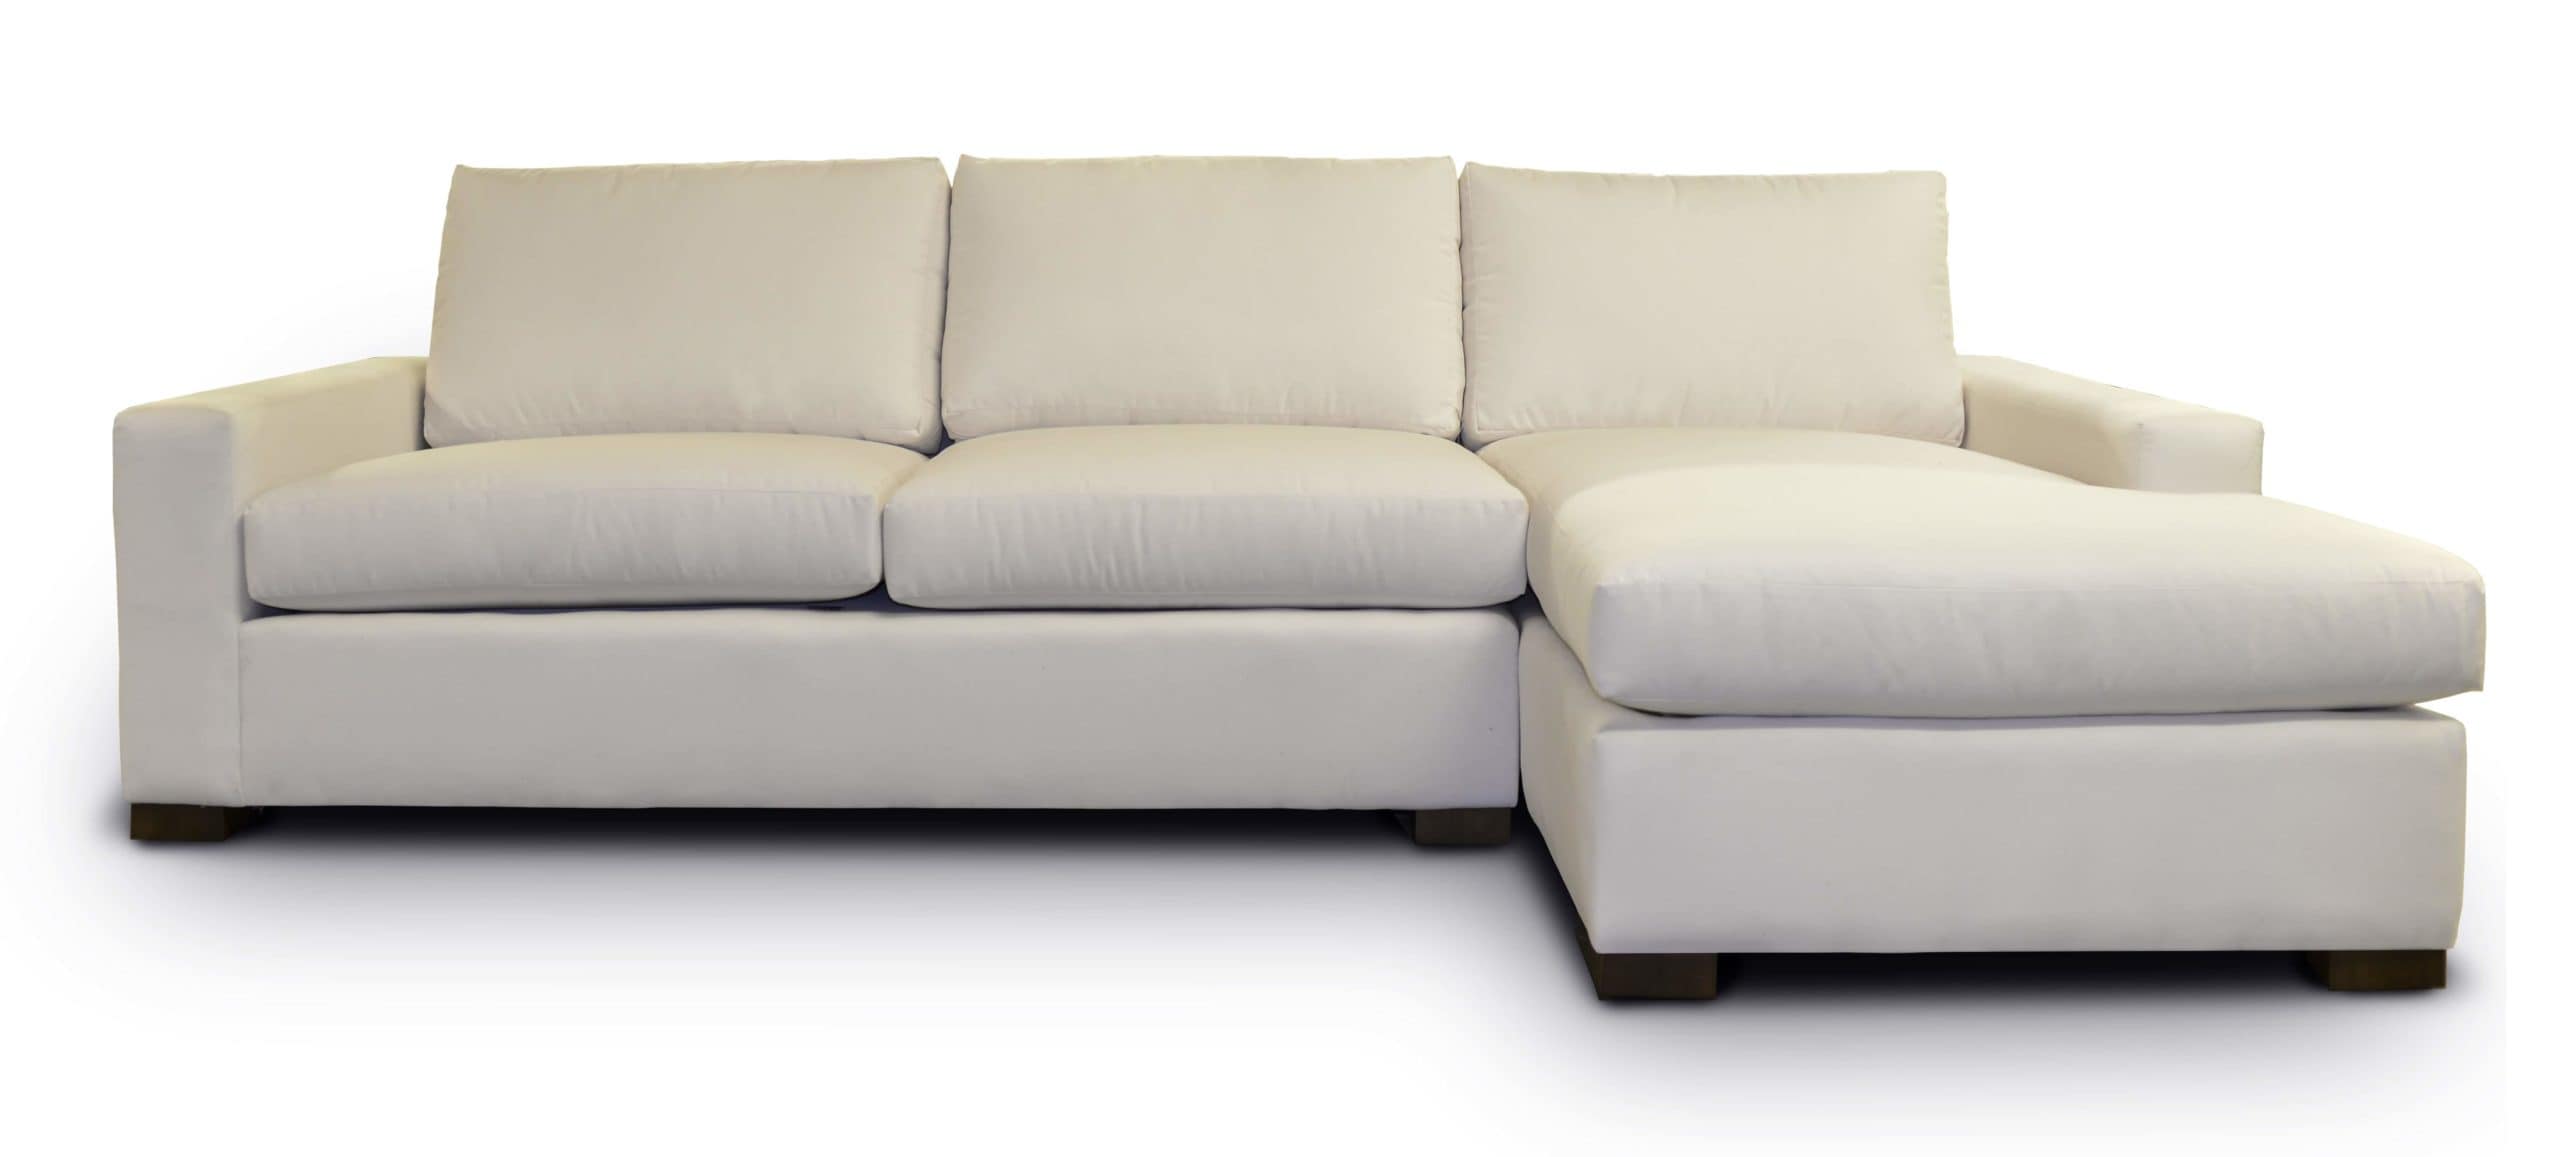 McQueen Sectional in Snow Fabric